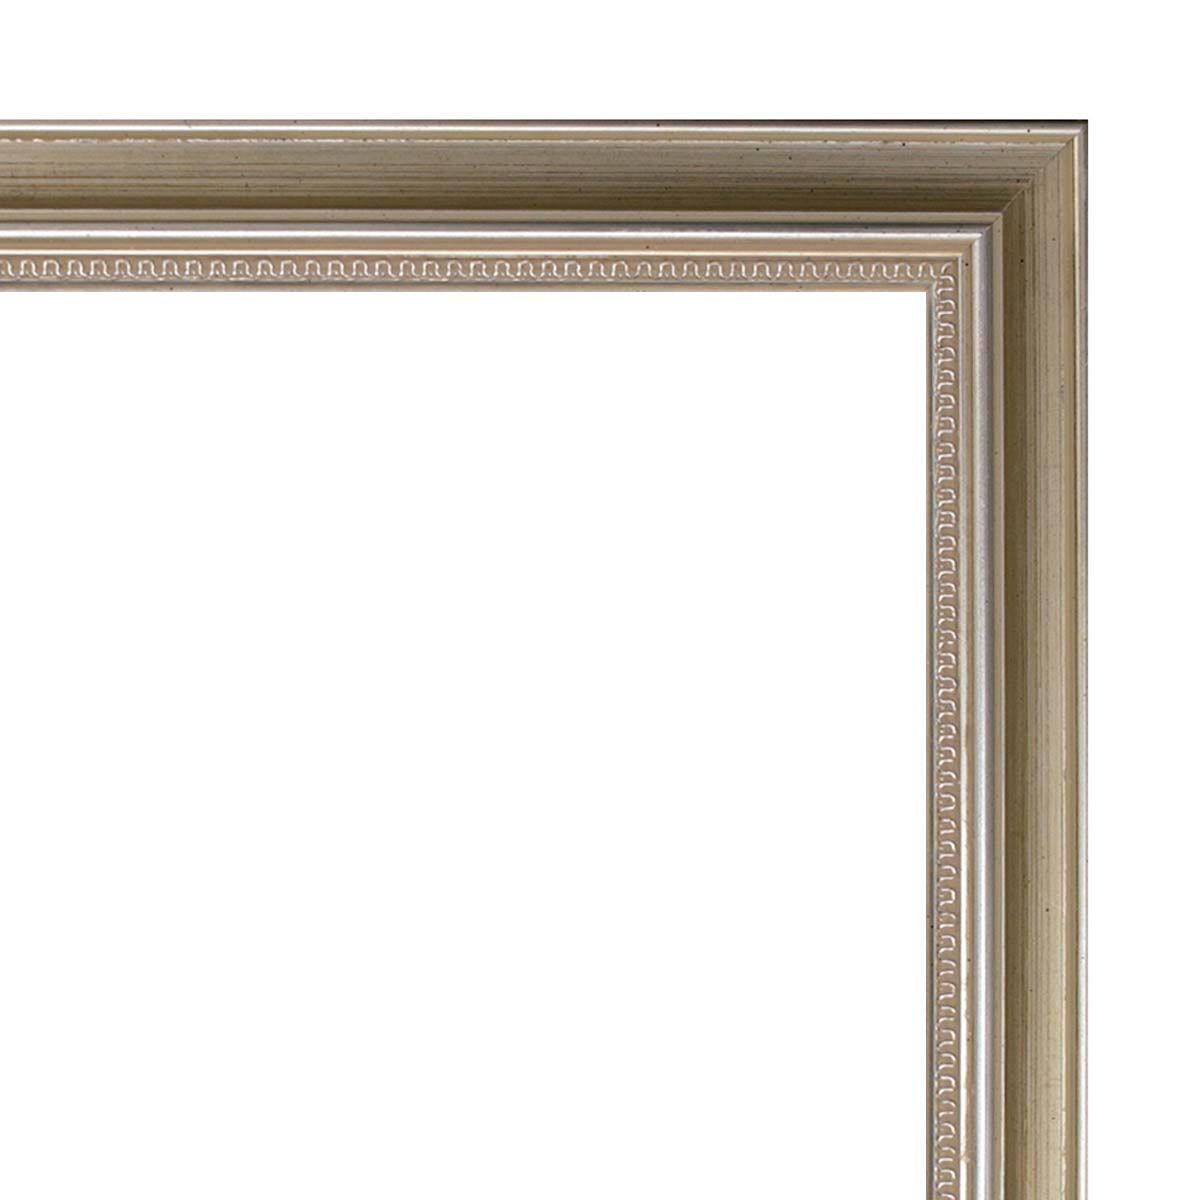 Tallahassee Silver Frames - Millbrook Collection | Jerry's Artarama